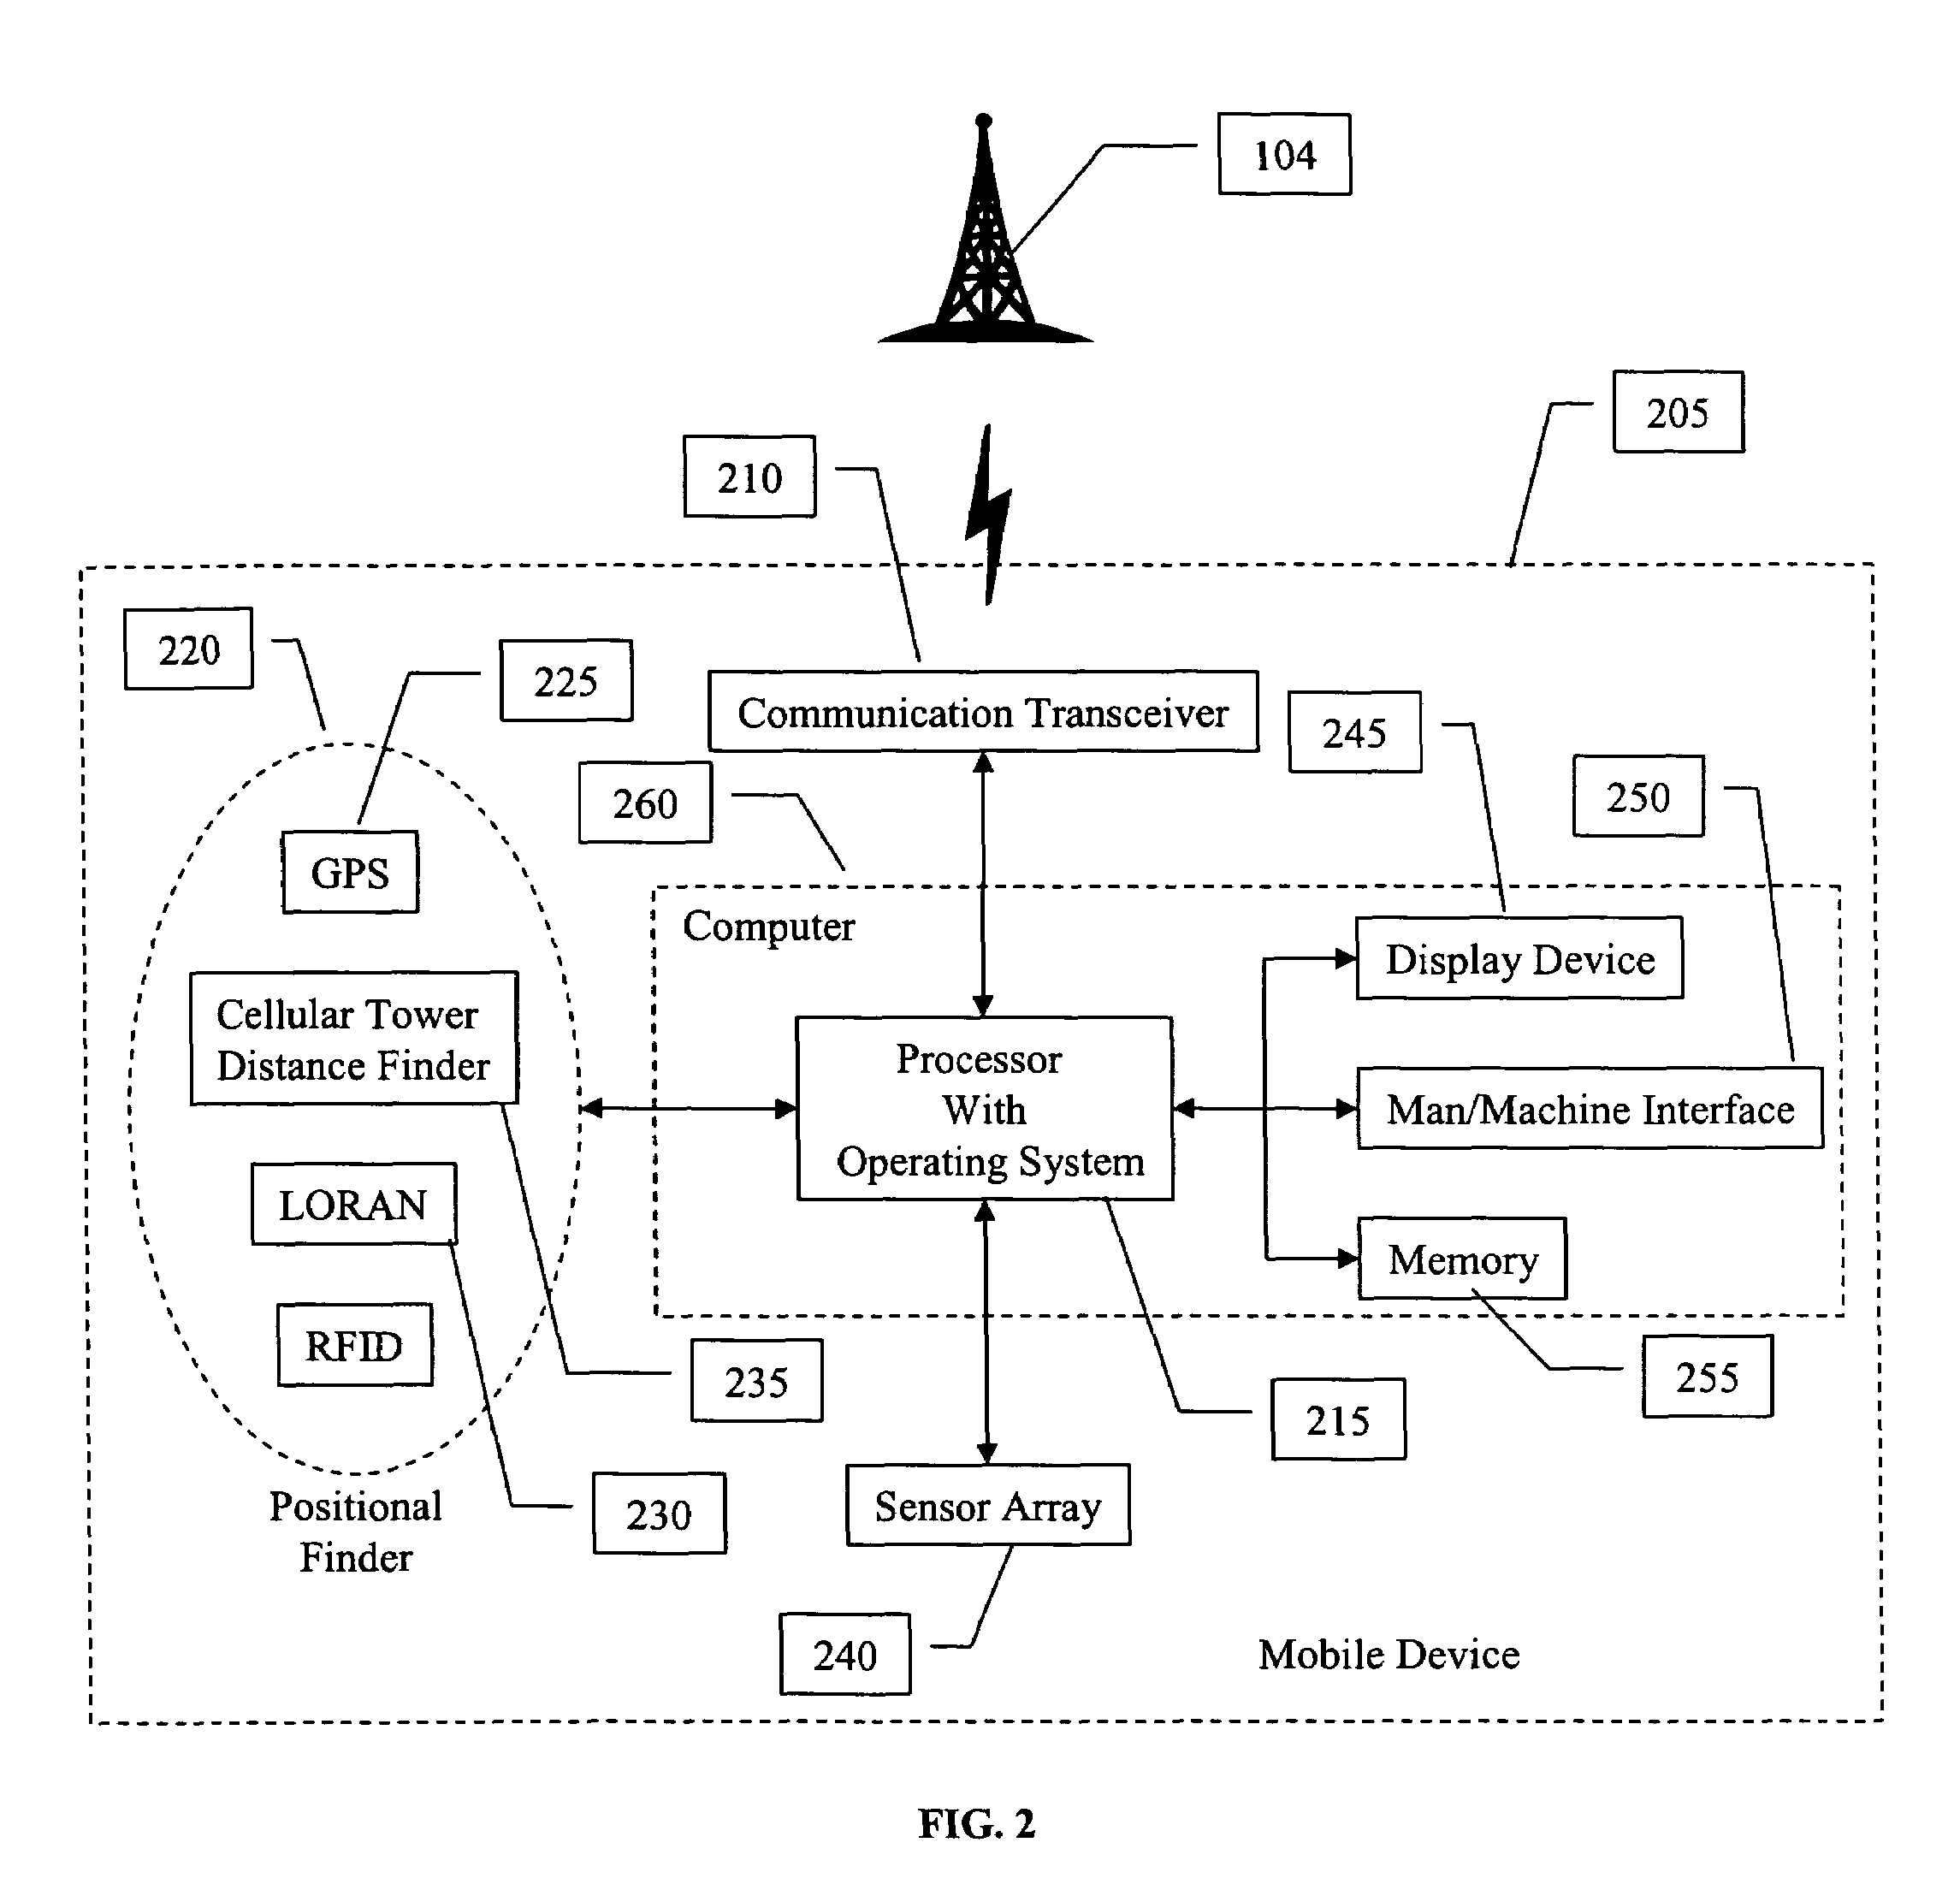 Method and system to transfer and to display location information about an object